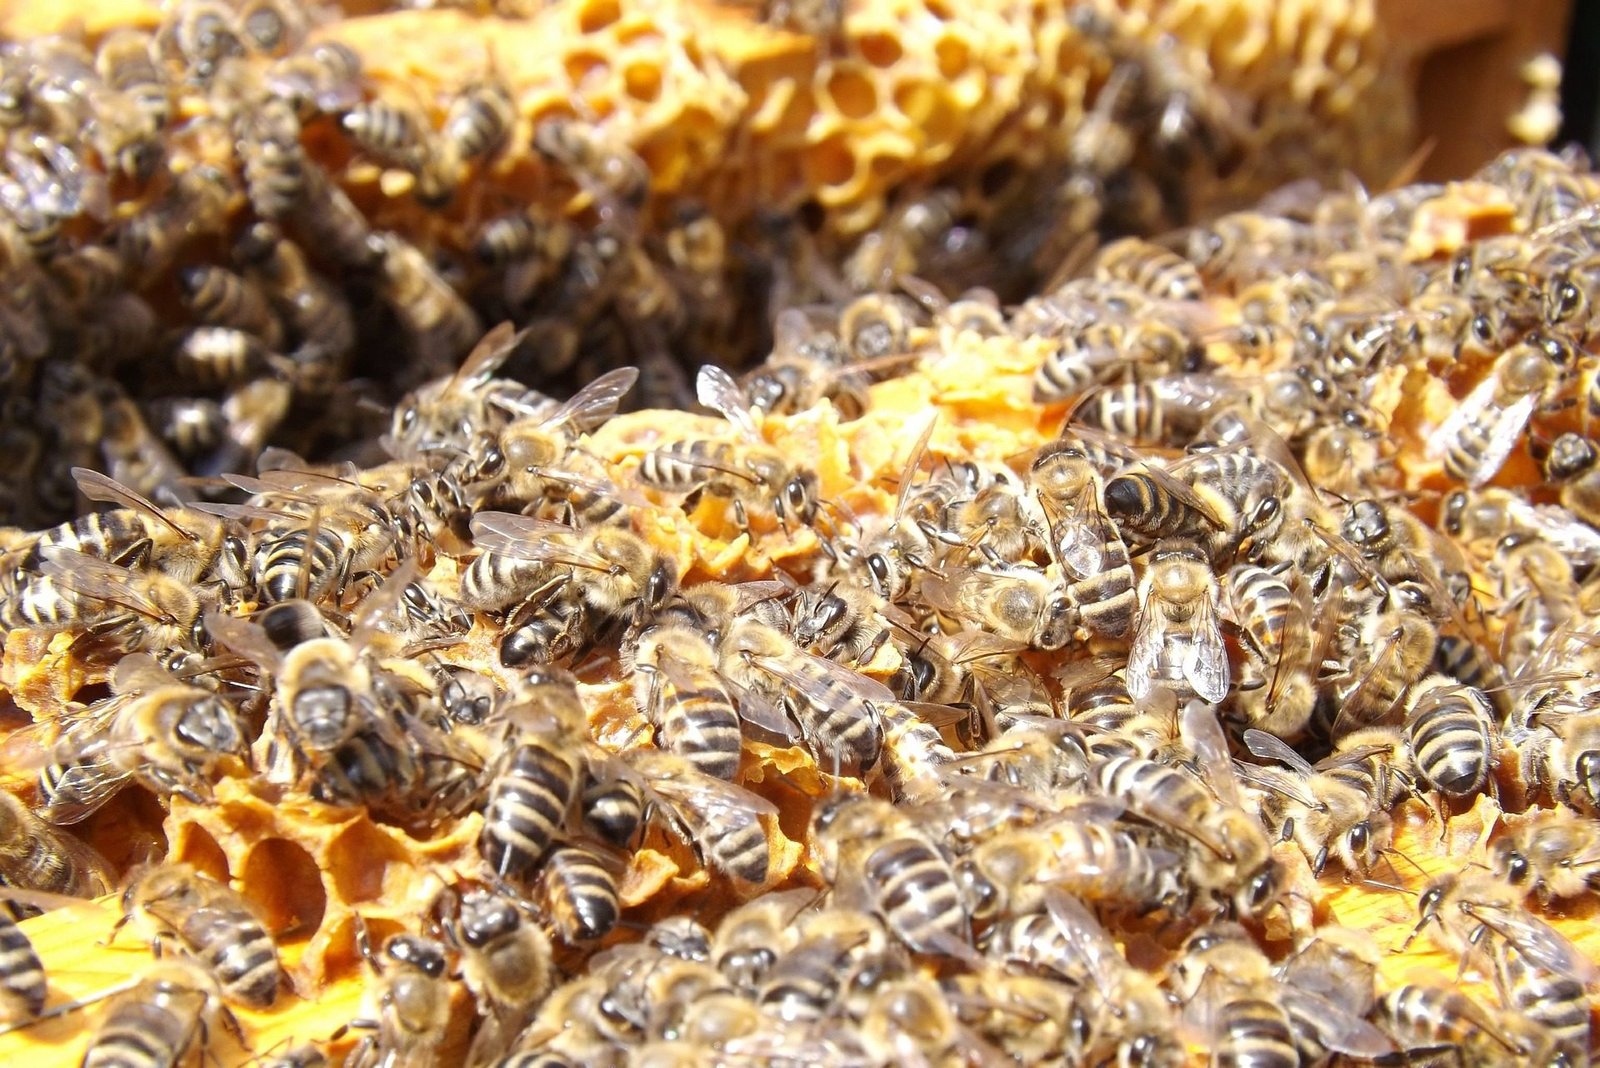 Bees on Honey Comb